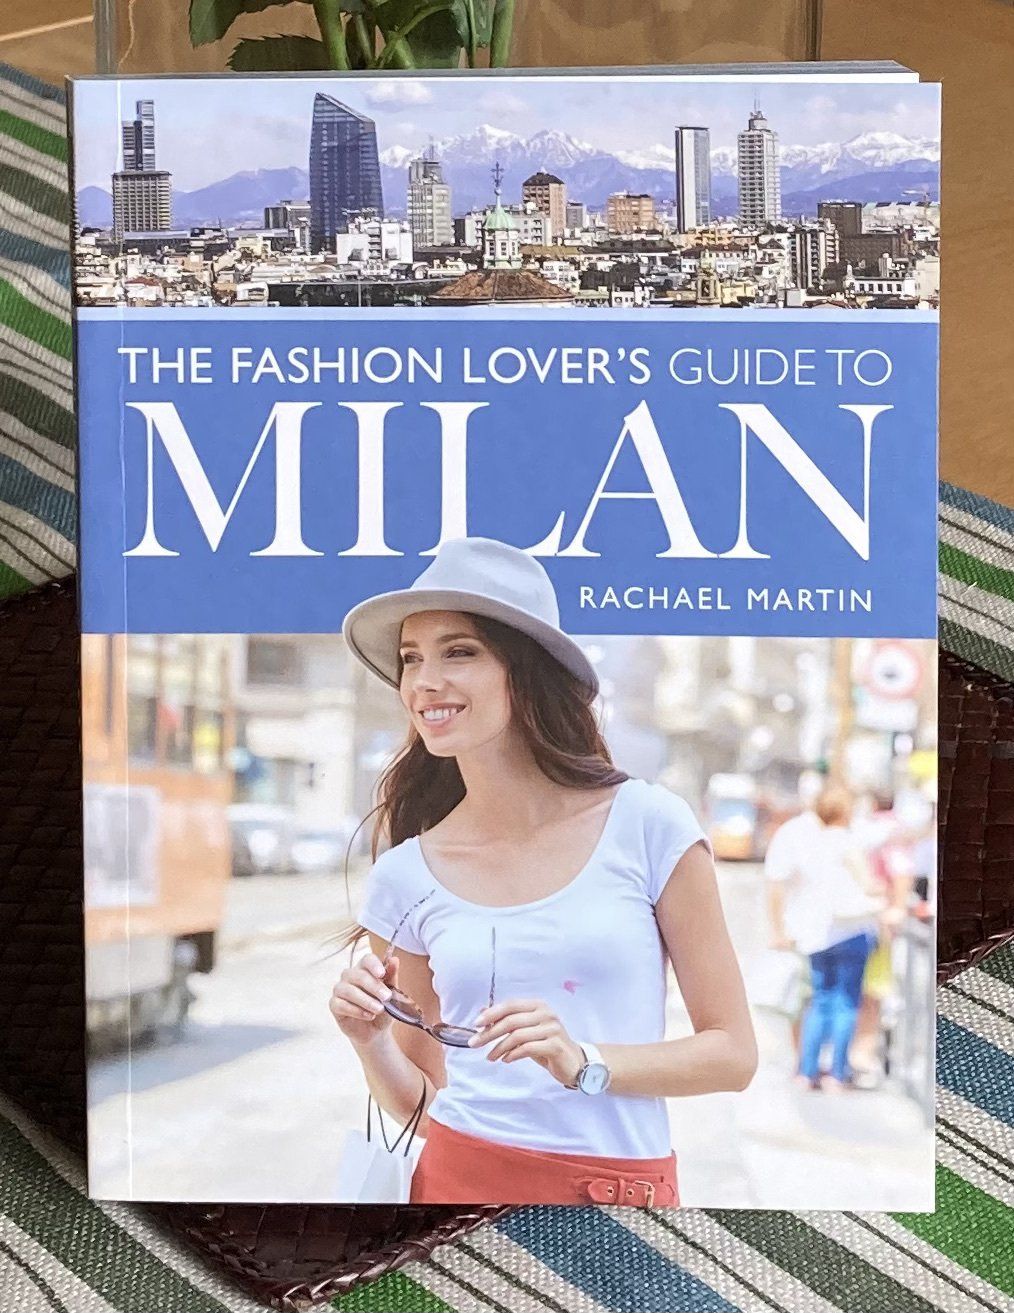 Book: The Fashion Lover's Guide to Milan, by Rachael Martin